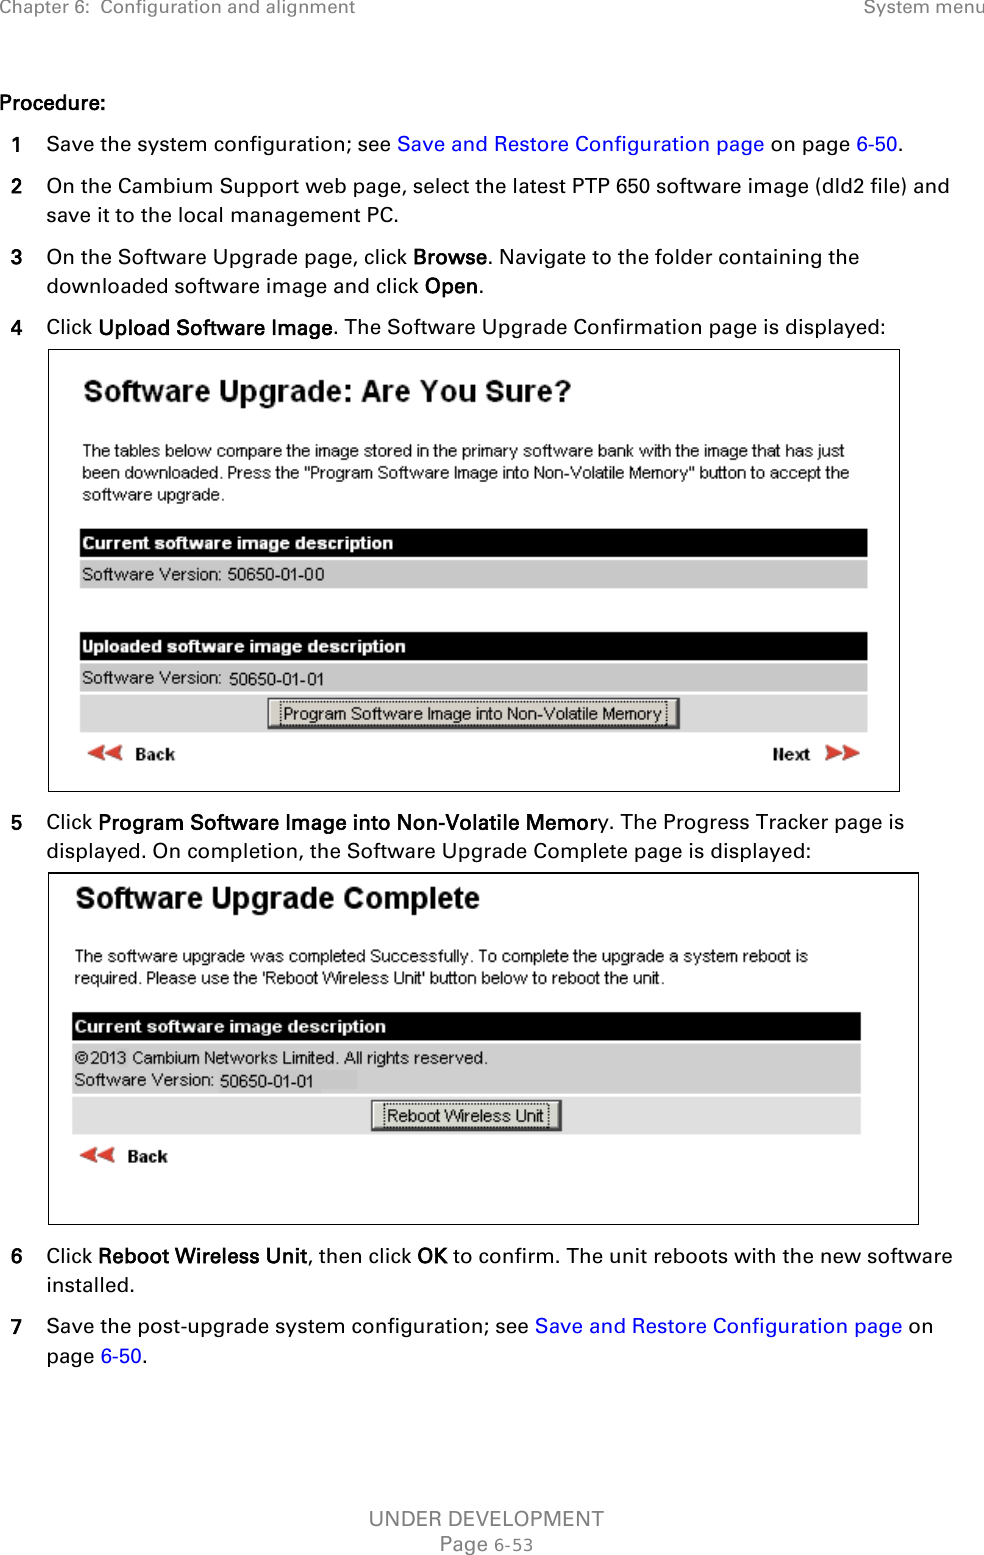 Chapter 6:  Configuration and alignment System menu  Procedure: 1 Save the system configuration; see Save and Restore Configuration page on page 6-50. 2 On the Cambium Support web page, select the latest PTP 650 software image (dld2 file) and save it to the local management PC. 3 On the Software Upgrade page, click Browse. Navigate to the folder containing the downloaded software image and click Open. 4 Click Upload Software Image. The Software Upgrade Confirmation page is displayed:  5 Click Program Software Image into Non-Volatile Memory. The Progress Tracker page is displayed. On completion, the Software Upgrade Complete page is displayed:  6 Click Reboot Wireless Unit, then click OK to confirm. The unit reboots with the new software installed. 7 Save the post-upgrade system configuration; see Save and Restore Configuration page on page 6-50.  UNDER DEVELOPMENT Page 6-53 